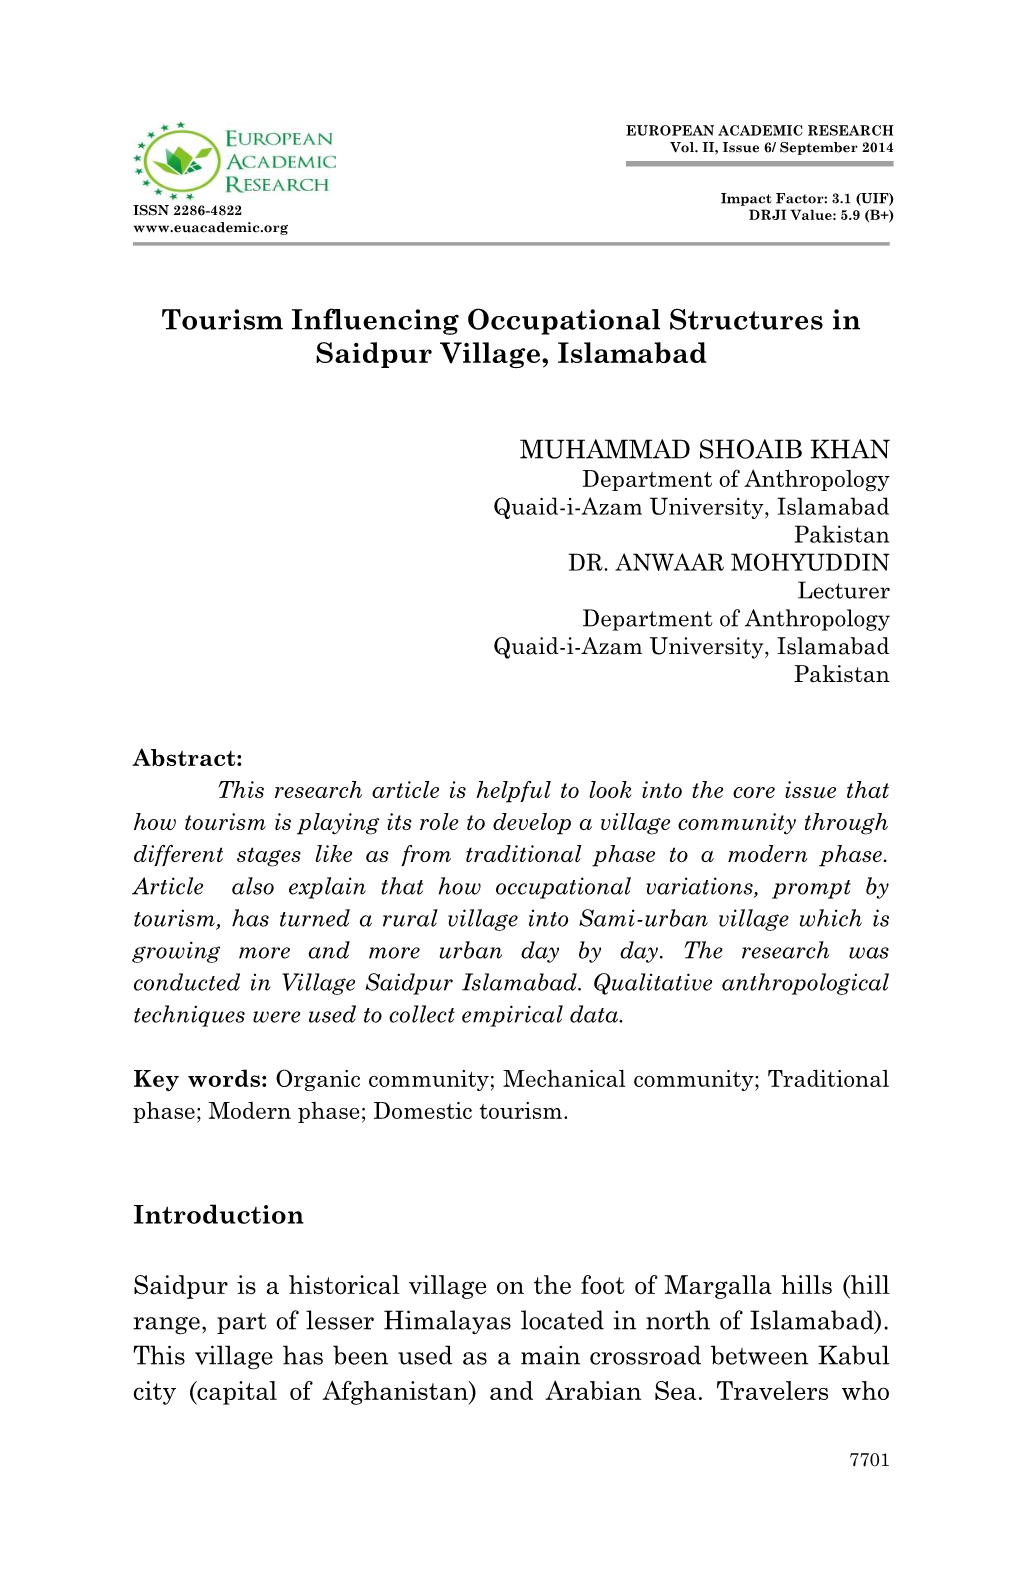 Tourism Influencing Occupational Structures in Saidpur Village, Islamabad